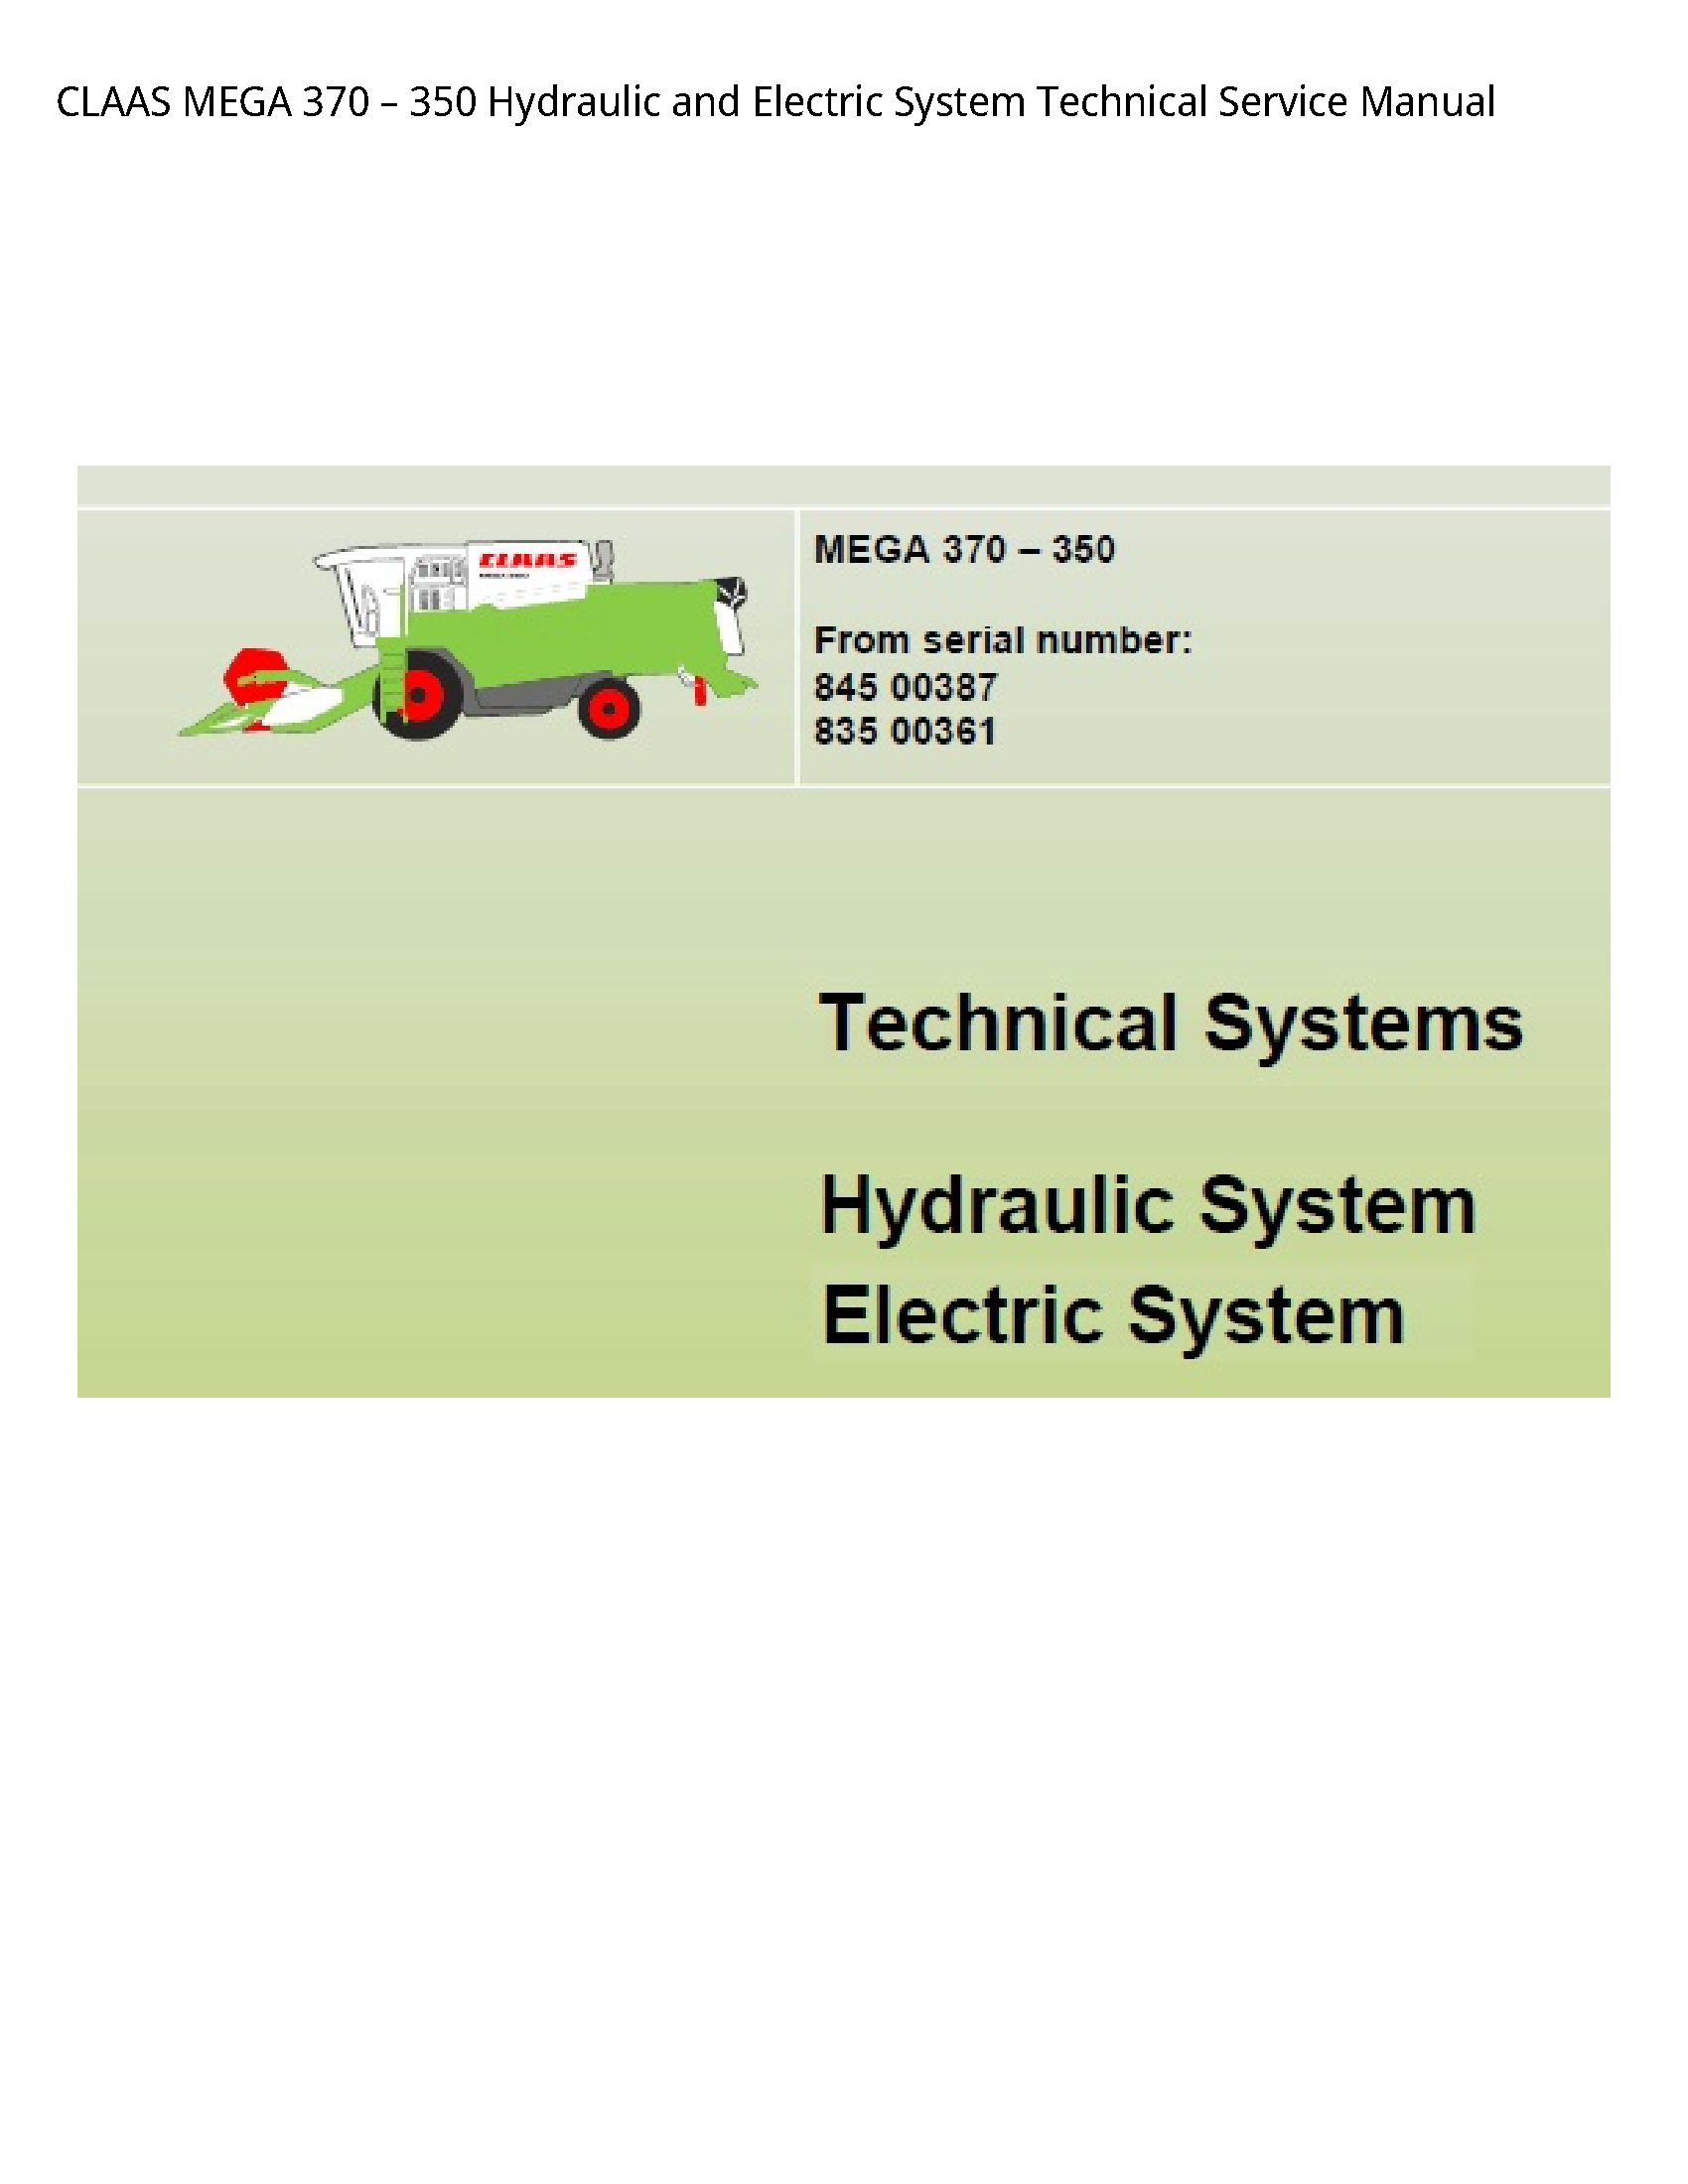 Claas 370 MEGA Hydraulic  Electric System Technical Service manual